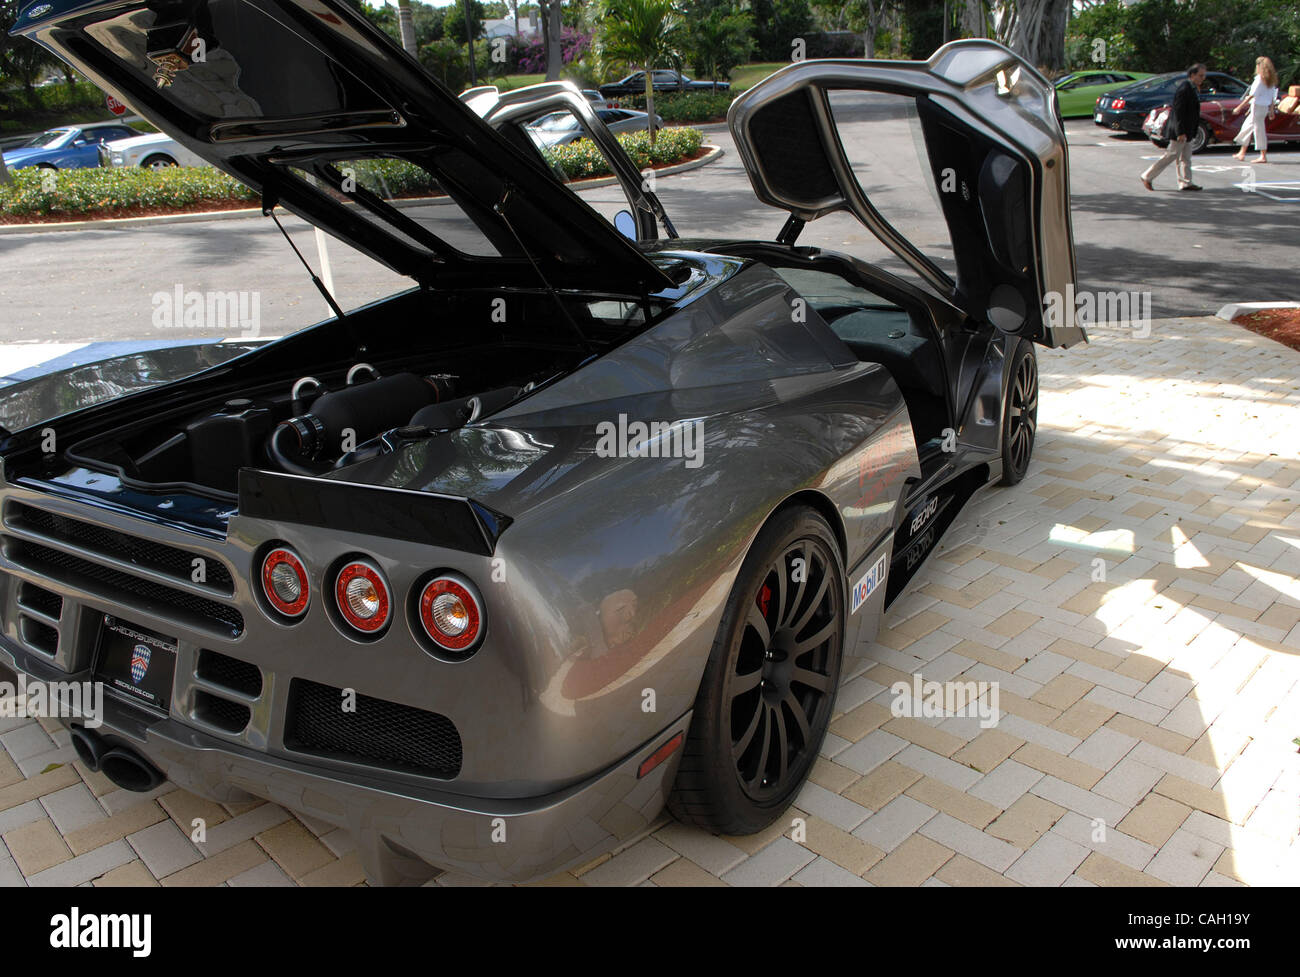 012708 met Trump 2 Photo by Steve Mitchell/The Palm Beach Post-0048230A-STORY TBA-  The Shelby SuperCars 'SSC' Ultimate Aero has twin turbo V-8 engine, it has 1,183 horsepower and 1094 ft.-lbs. of torque making the world’s most powerful production car. The average top speed is 256.18 mph. A few priv Stock Photo